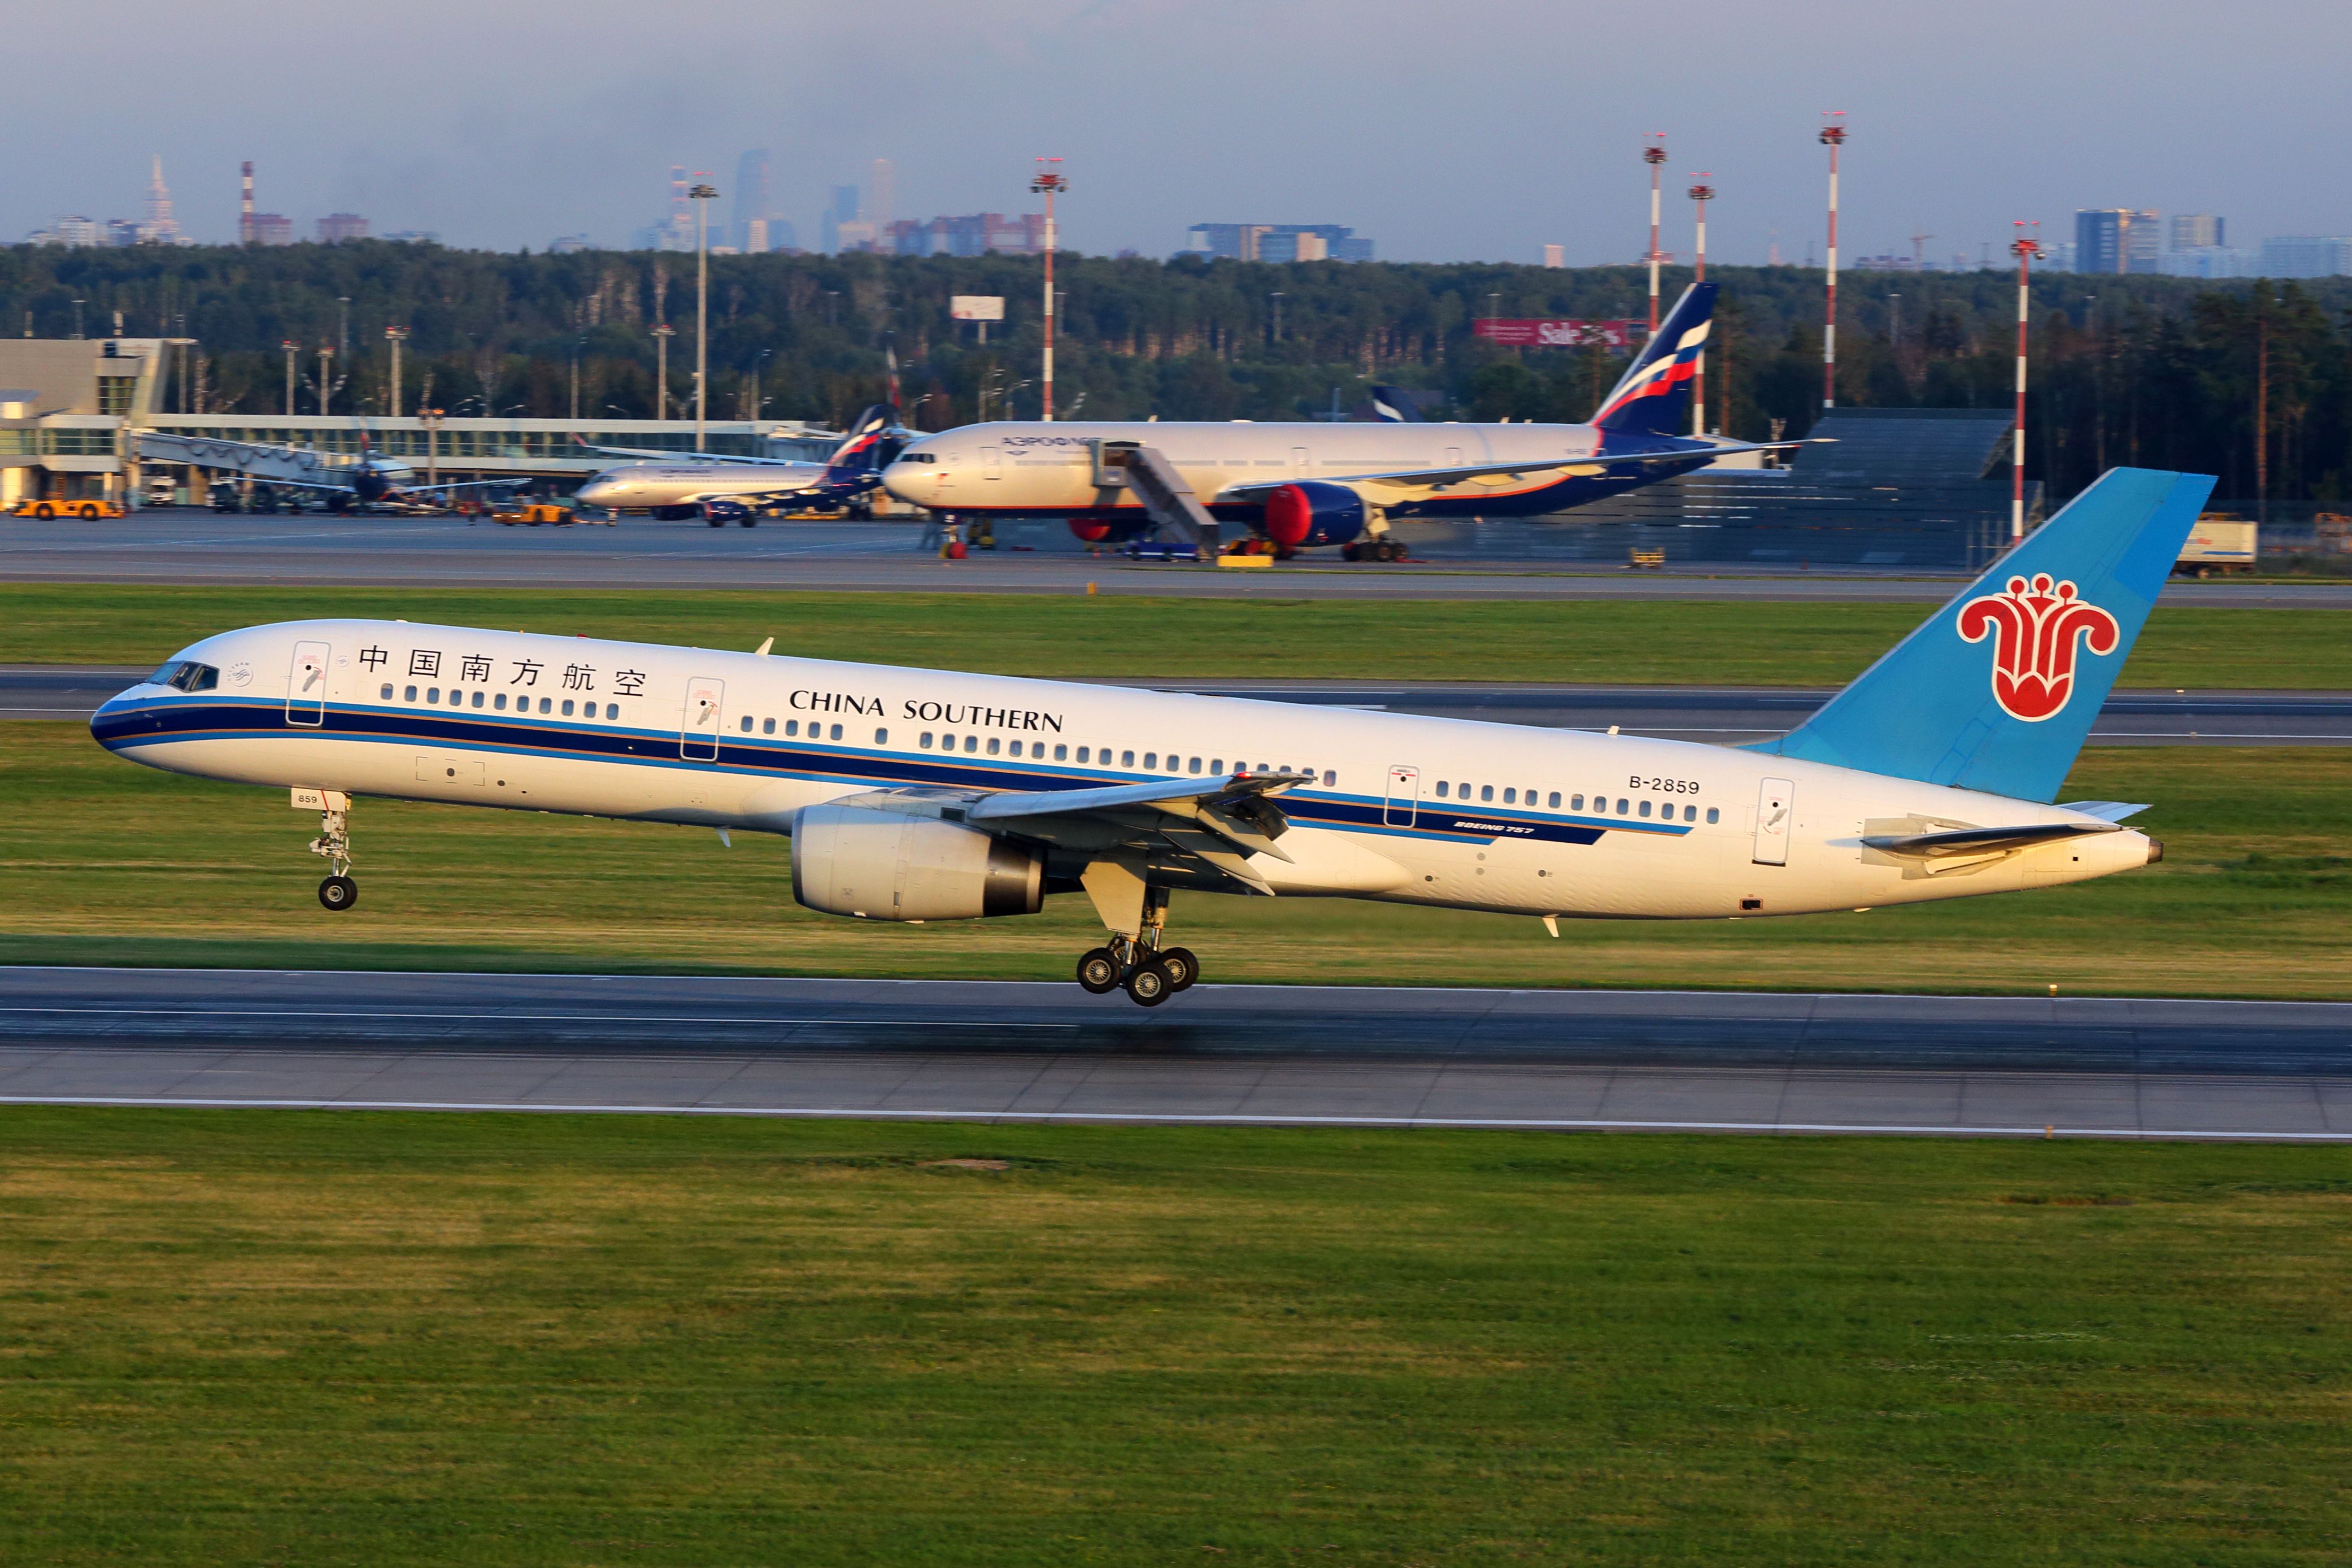 A China Southern Boeing 757 as it's landing.